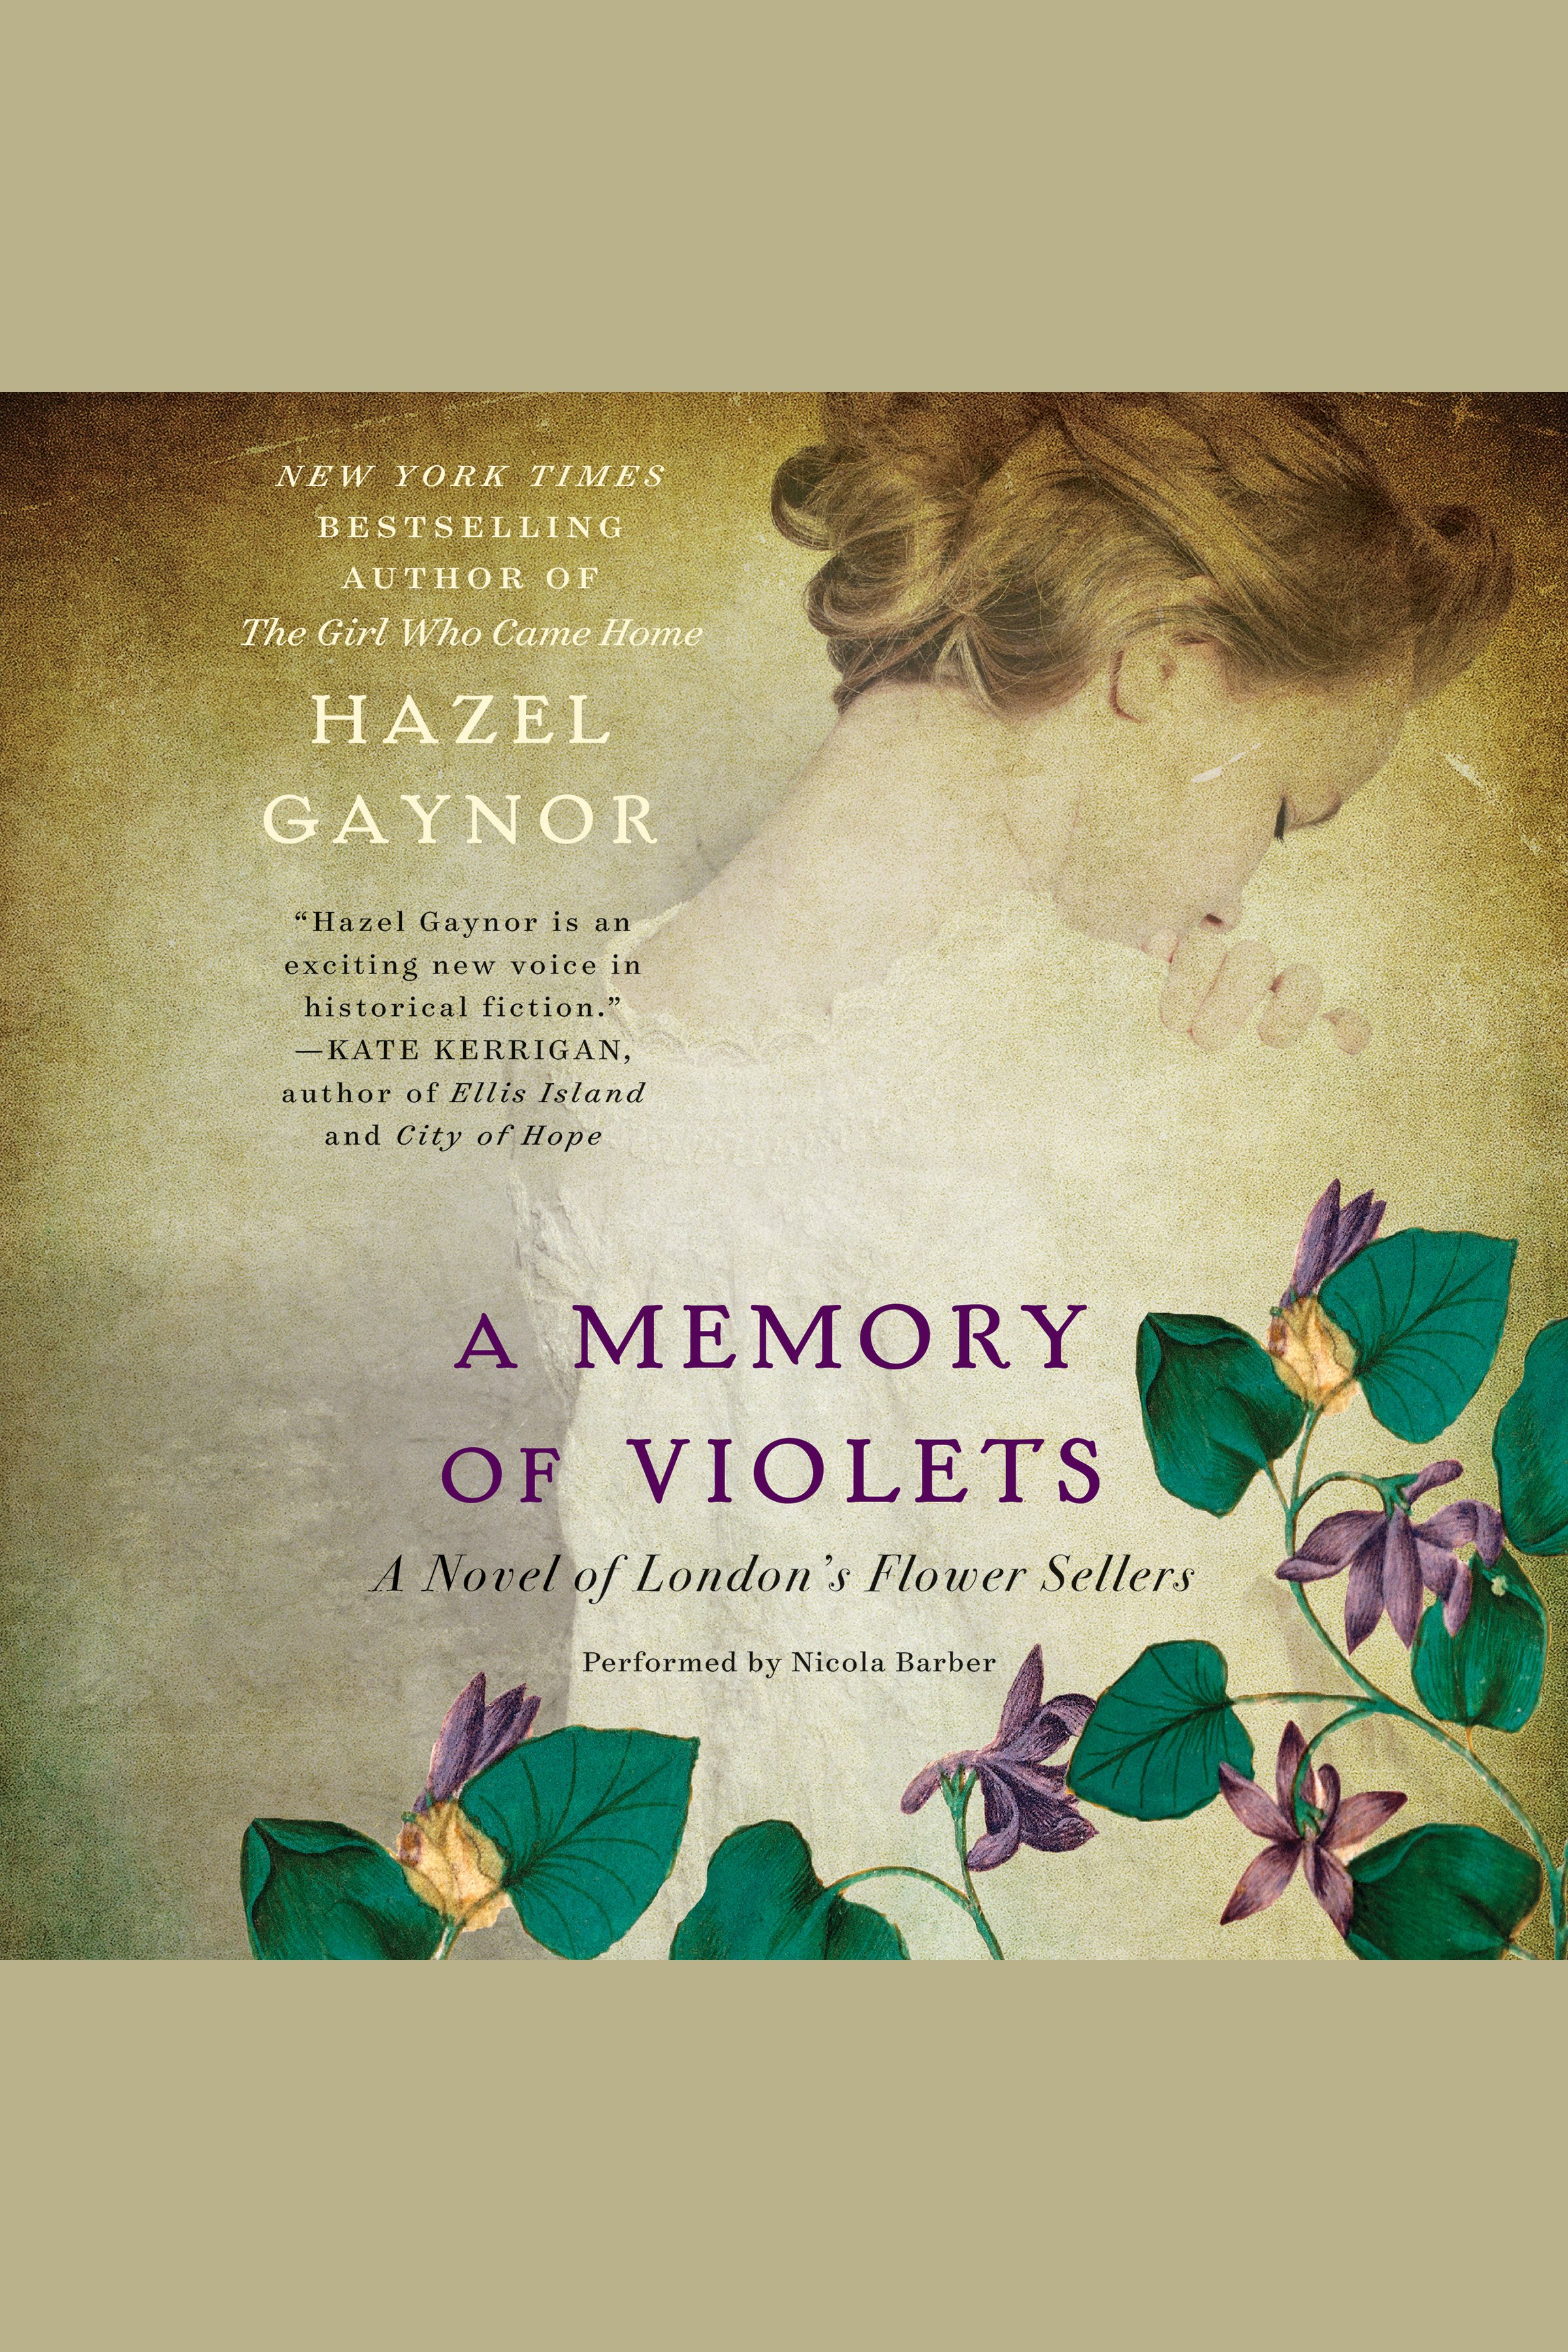 Umschlagbild für Memory of Violets, A [electronic resource] : A Novel of London's Flower Sellers